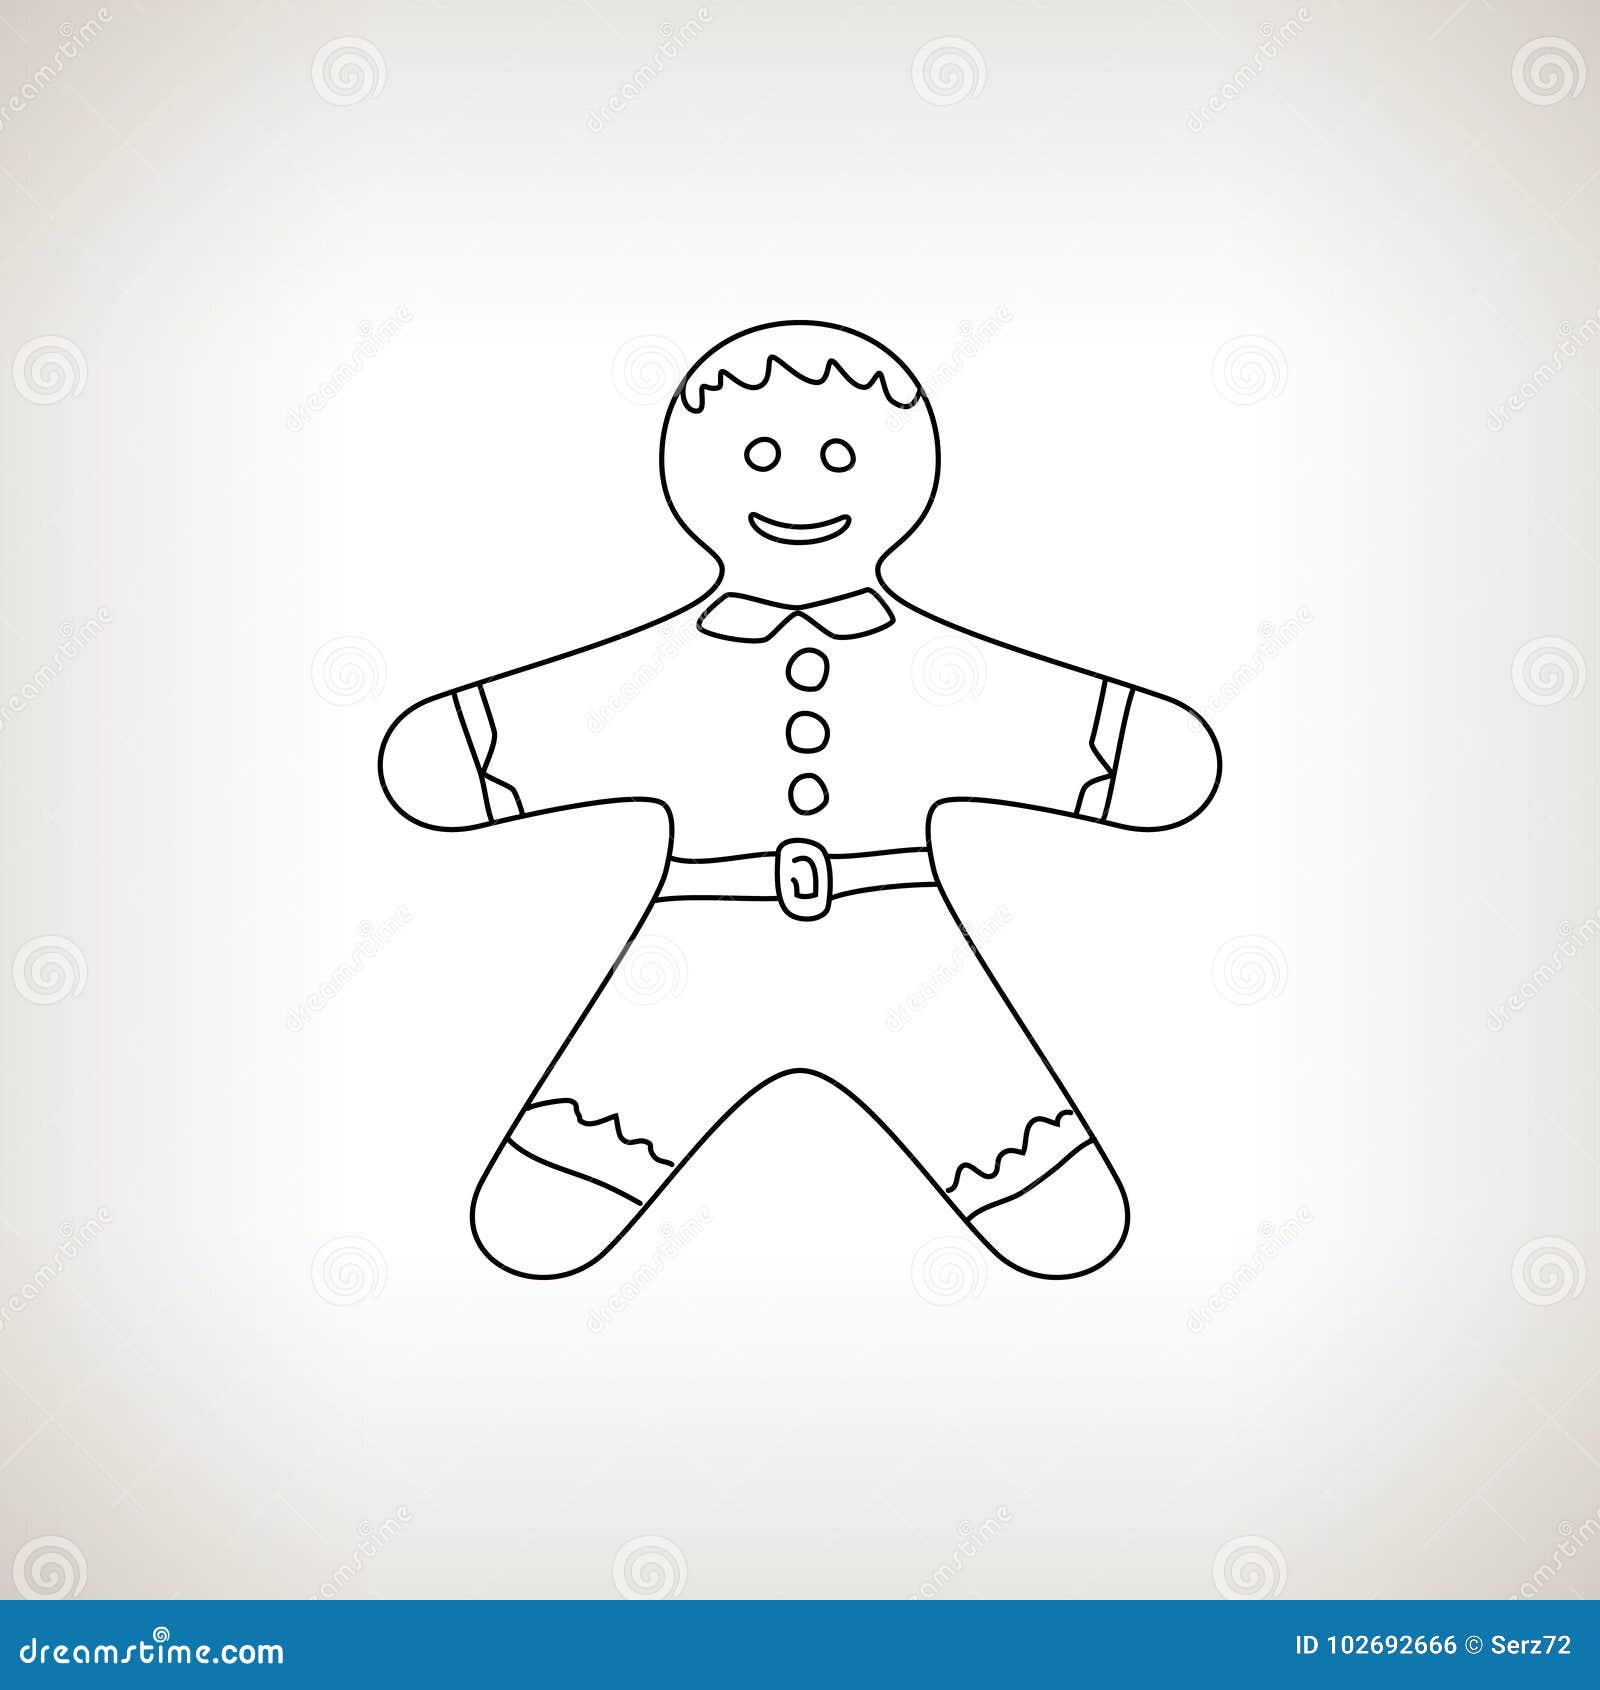 How To Draw a Gingerbread Man Easy Step-By-Step Tutorial